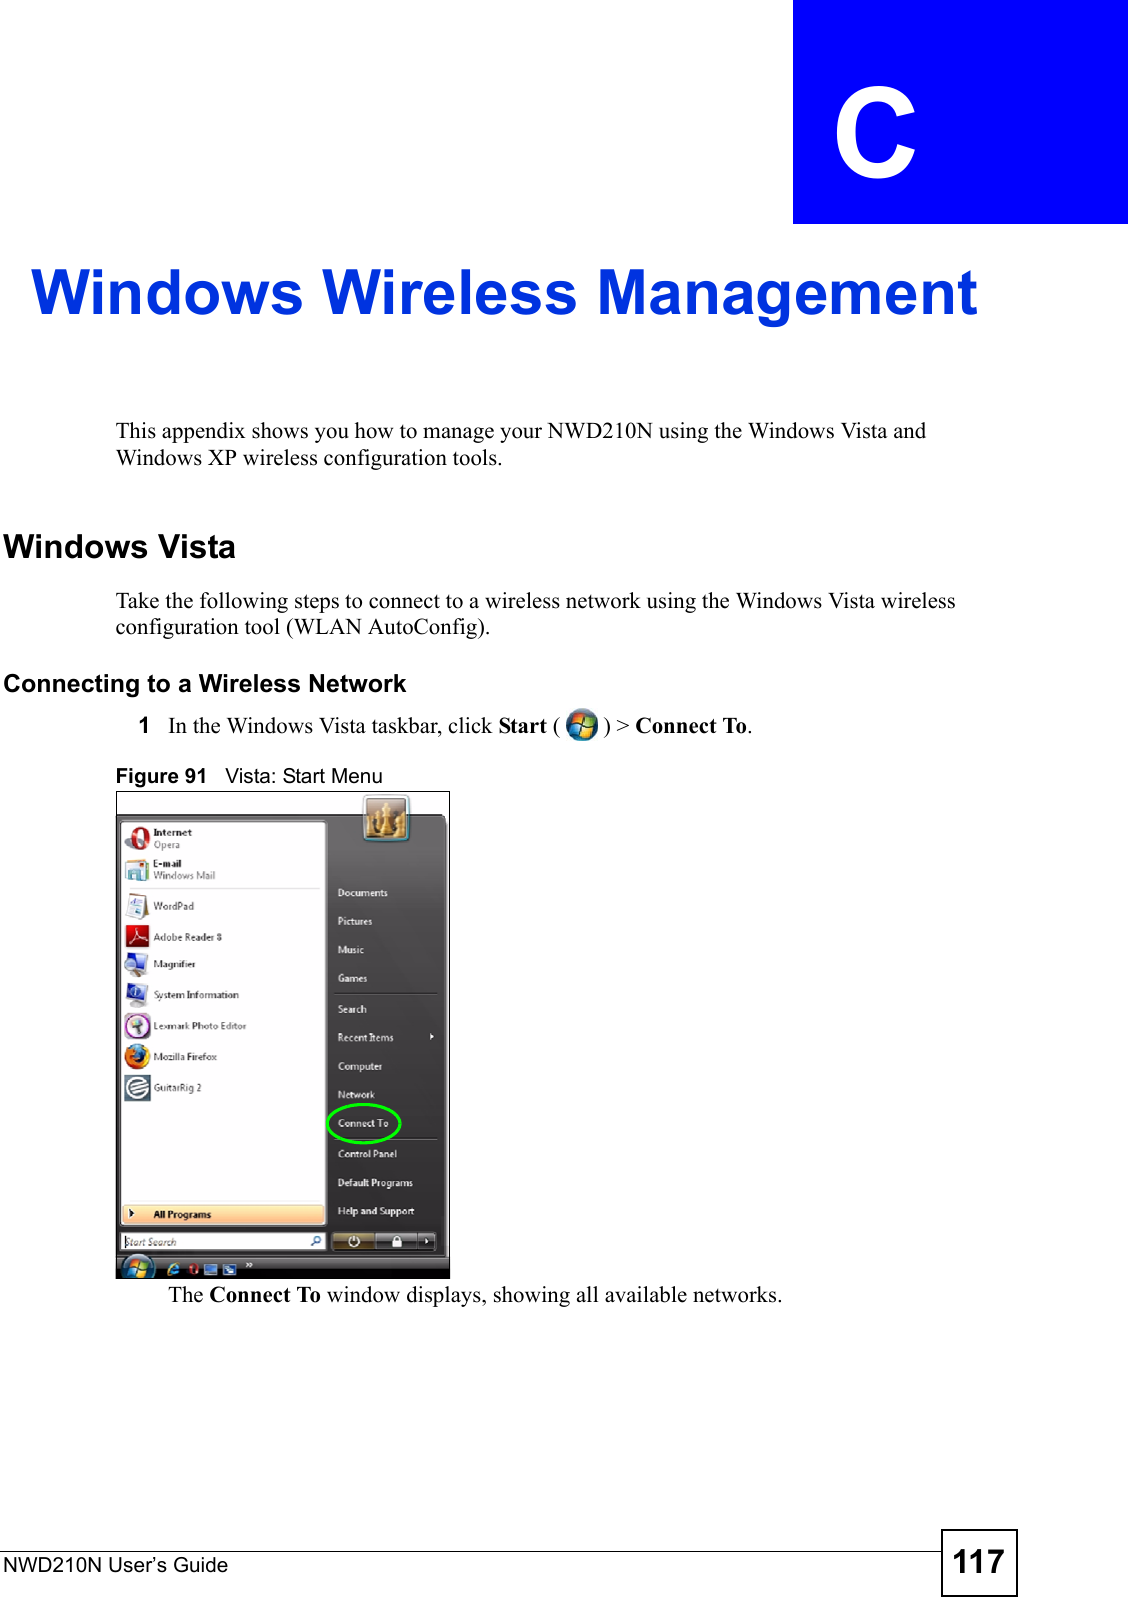 NWD210N User’s Guide 117APPENDIX  C Windows Wireless ManagementThis appendix shows you how to manage your NWD210N using the Windows Vista and Windows XP wireless configuration tools.Windows VistaTake the following steps to connect to a wireless network using the Windows Vista wireless configuration tool (WLAN AutoConfig).Connecting to a Wireless Network1In the Windows Vista taskbar, click Start () &gt; Connect To. Figure 91   Vista: Start MenuThe Connect To window displays, showing all available networks. 